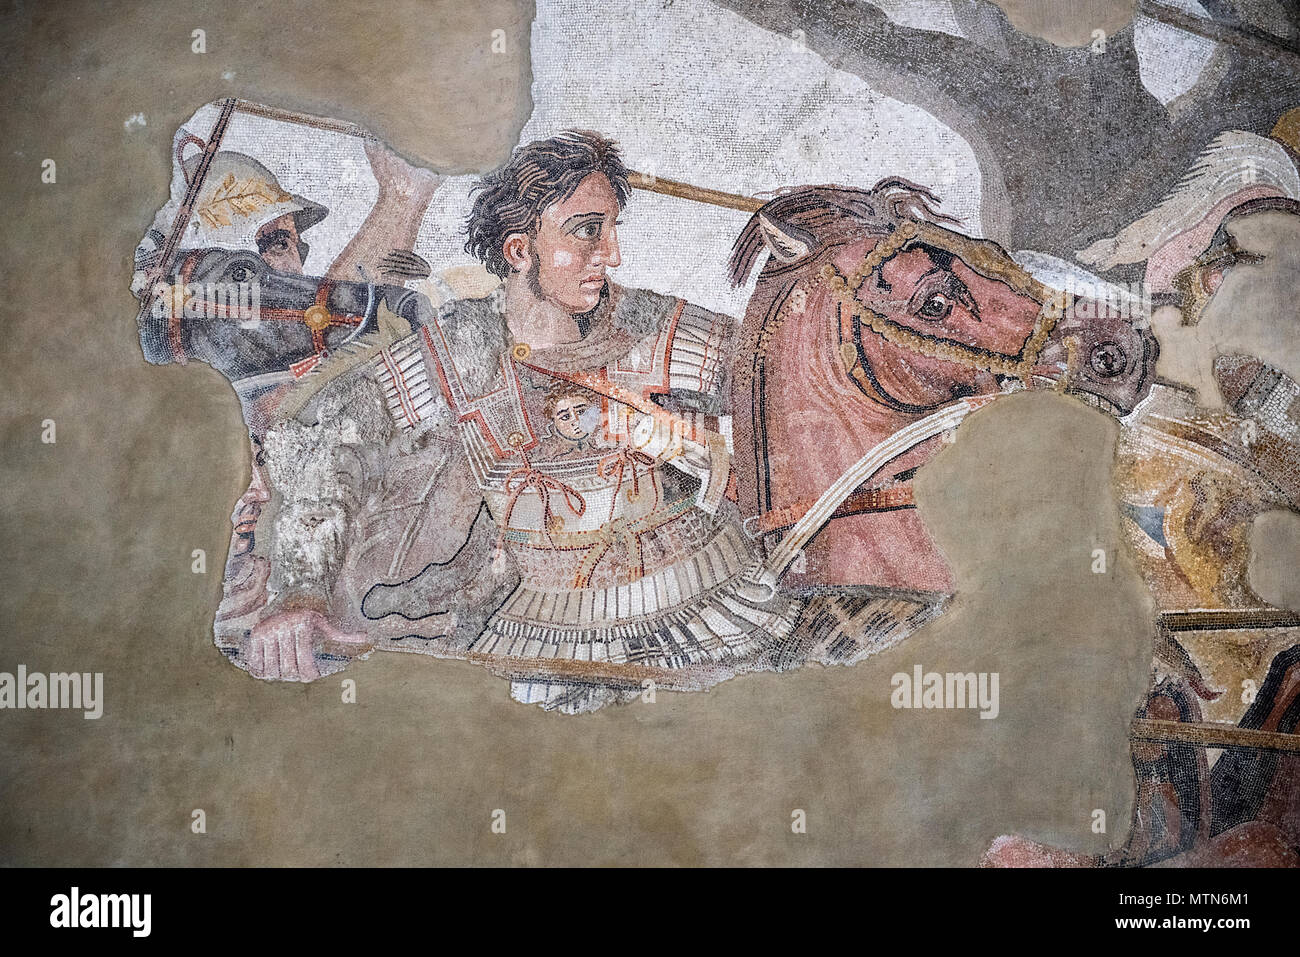 Naples, Italy - April 18, 2018. The Alexander the Great Mosaic inside the Naples Archaelogical Museum. Stock Photo